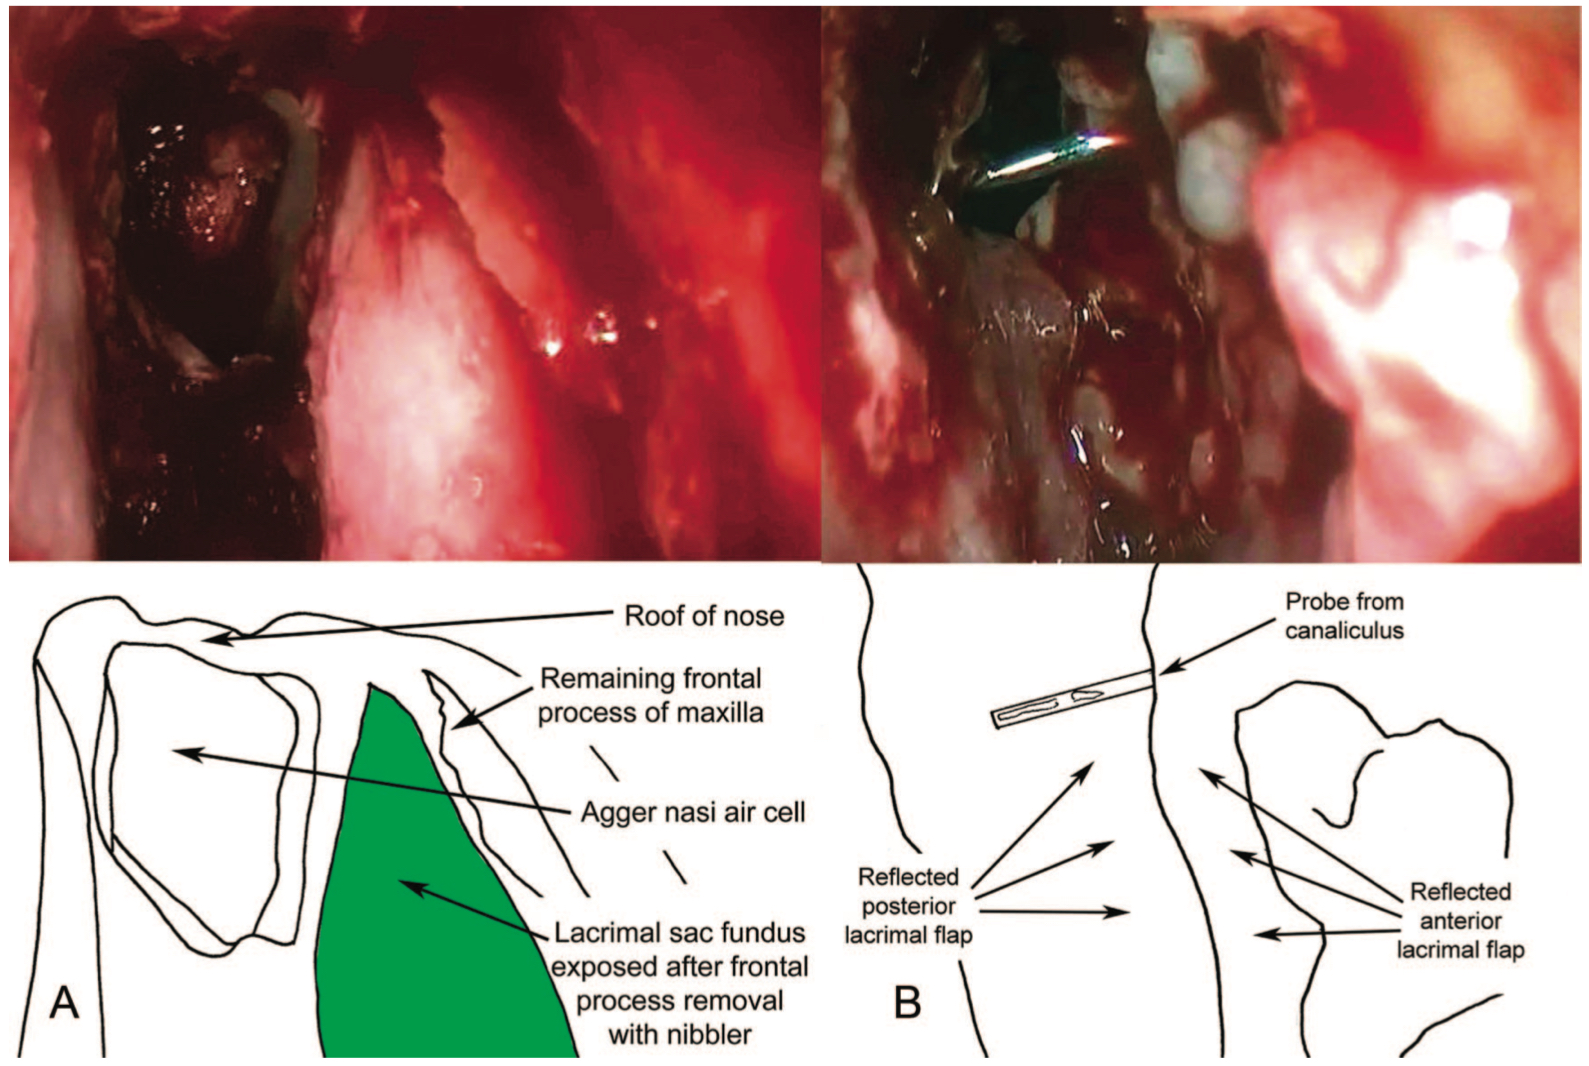 Endoscopic Dacryocystorhinostomy: A view of the lateral wall of the left nasal cavity showing full exposure of the lacrimal sac (A) and marsupialization of the lacrimal sac (B). The flaps should lie flat on the nasal wall like the pages of an open book, with no tendency towards closure (B).